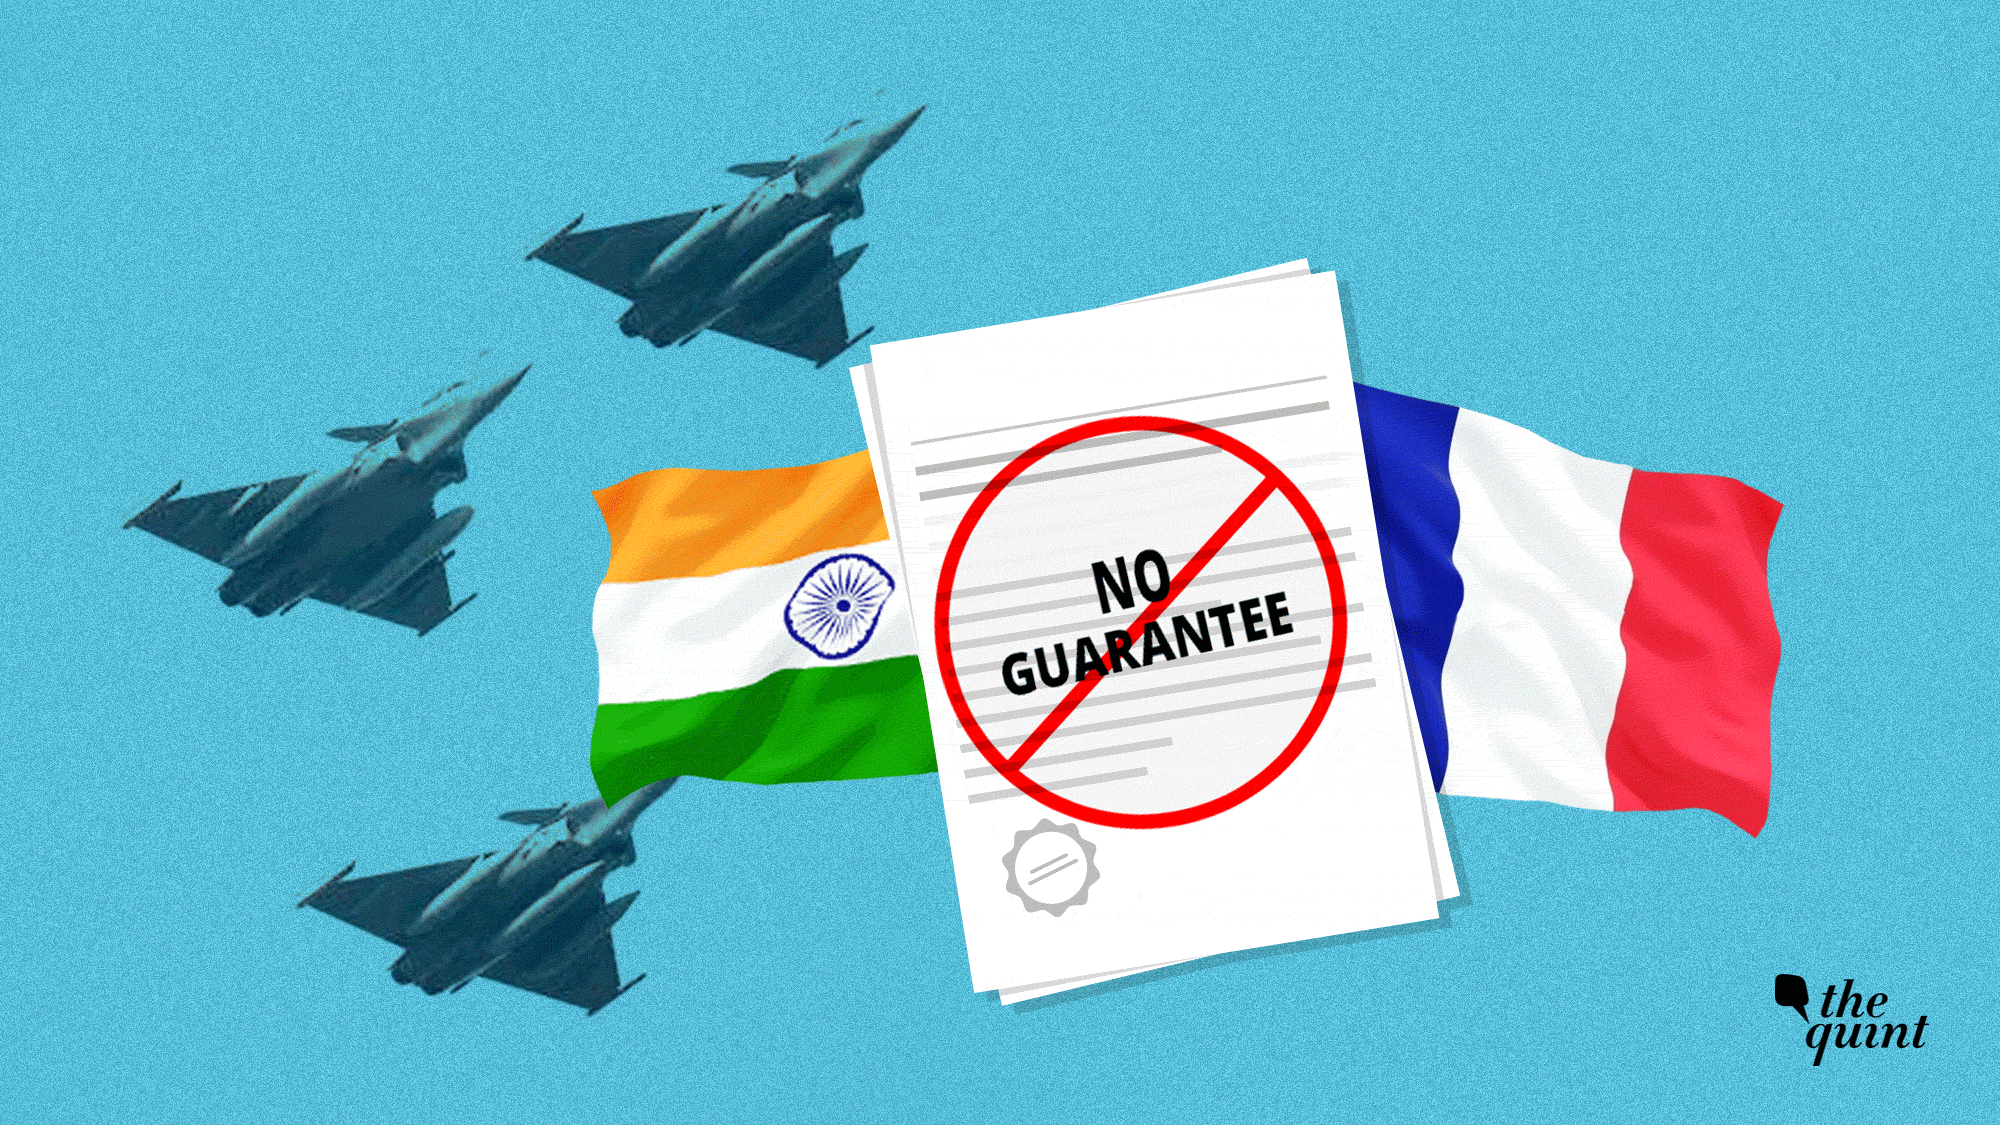 The Attorney-General informed the SC that France had not provided a sovereign guarantee for the Rafale Deal.